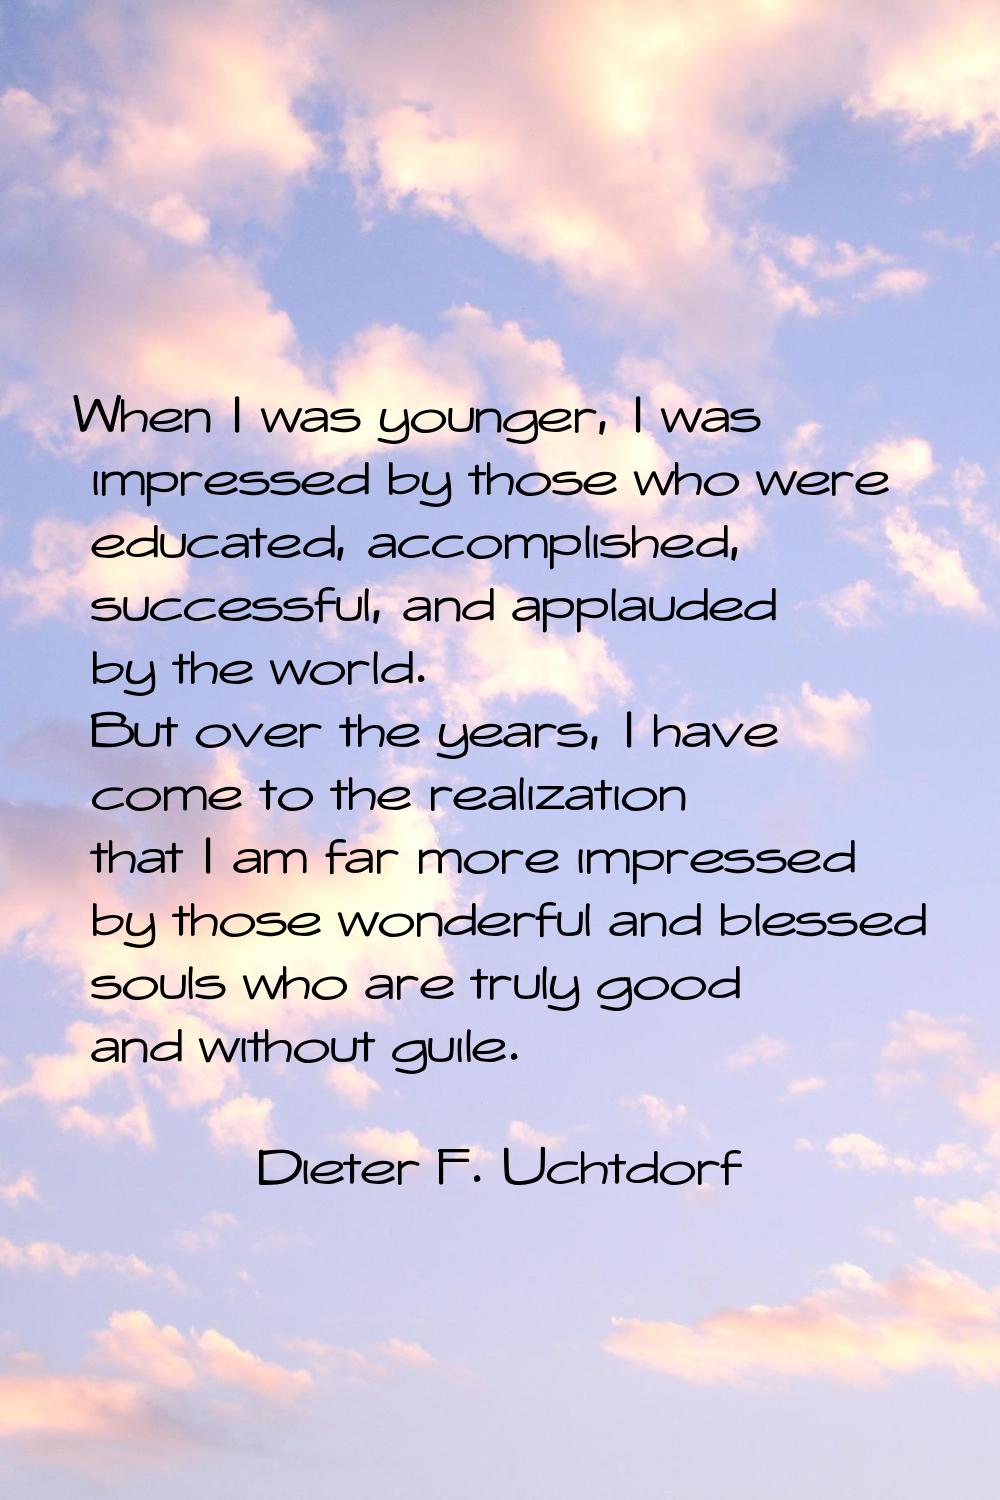 When I was younger, I was impressed by those who were educated, accomplished, successful, and appla